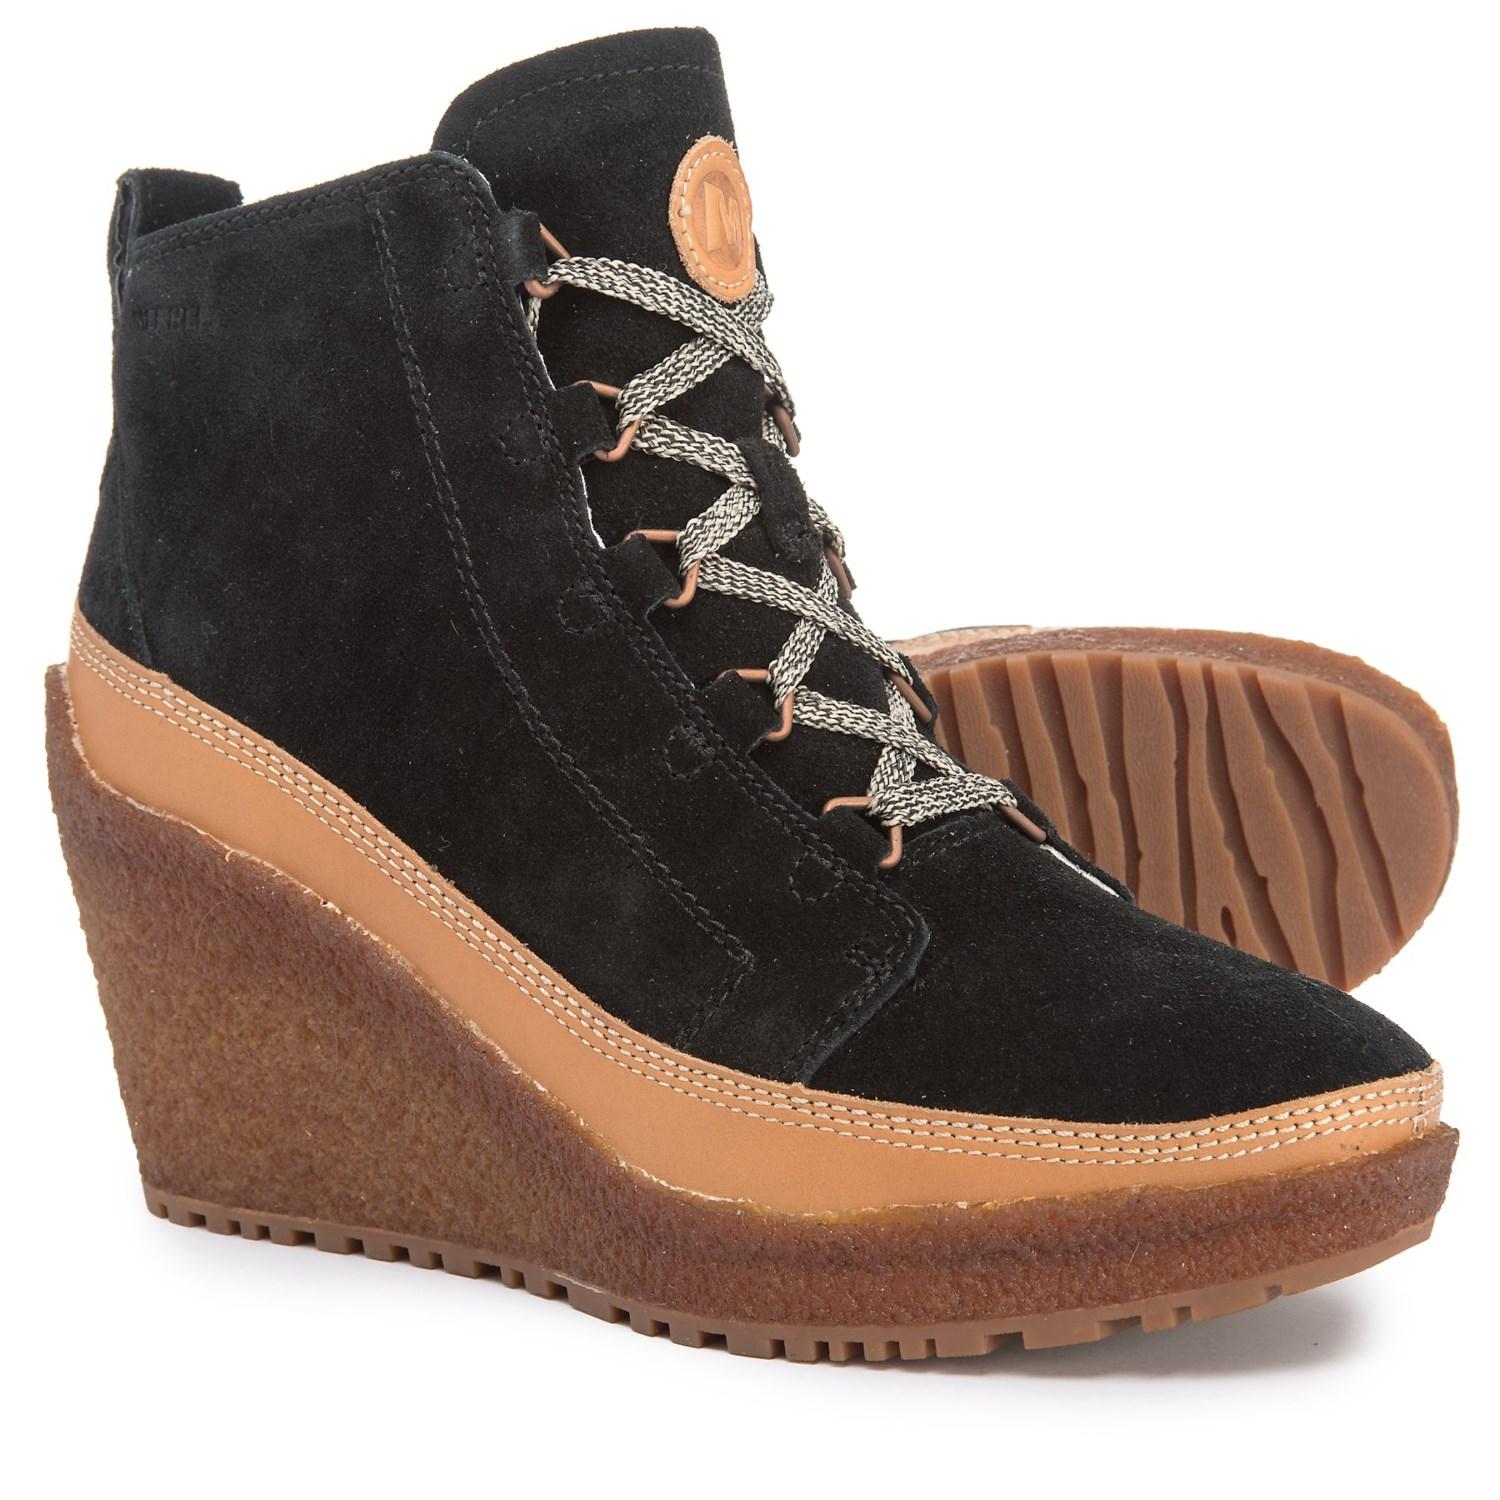 Merrell Suede Tremblant Lace-up Wedge Ankle Boots in Black - Lyst